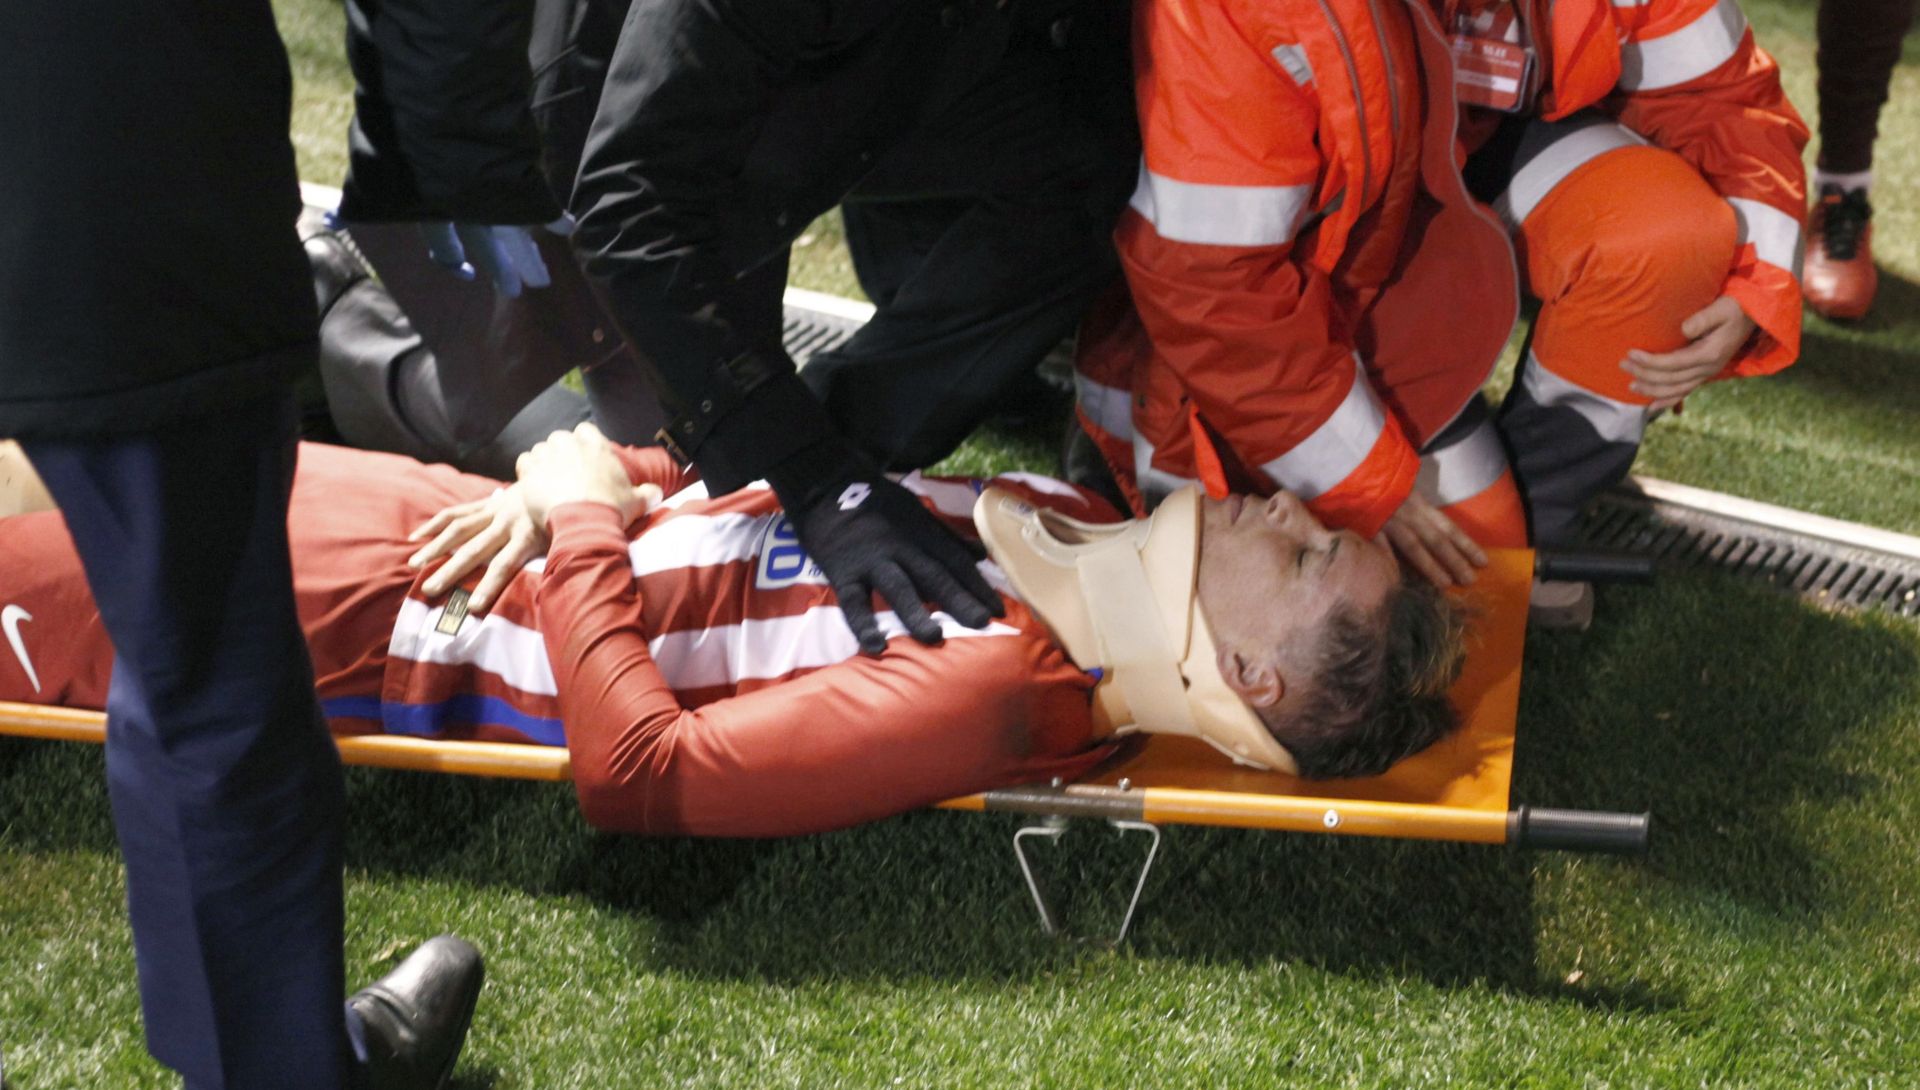 epa05825871 Atletico Madrid' s striker Fernando Torres gets medical assistance during the Spanish Primera Division soccer match against Deportiv Coruna played at the Riazor stadium in La Coruna, Galicia, Spain, on 02 March 2017.  EPA/CABALAR